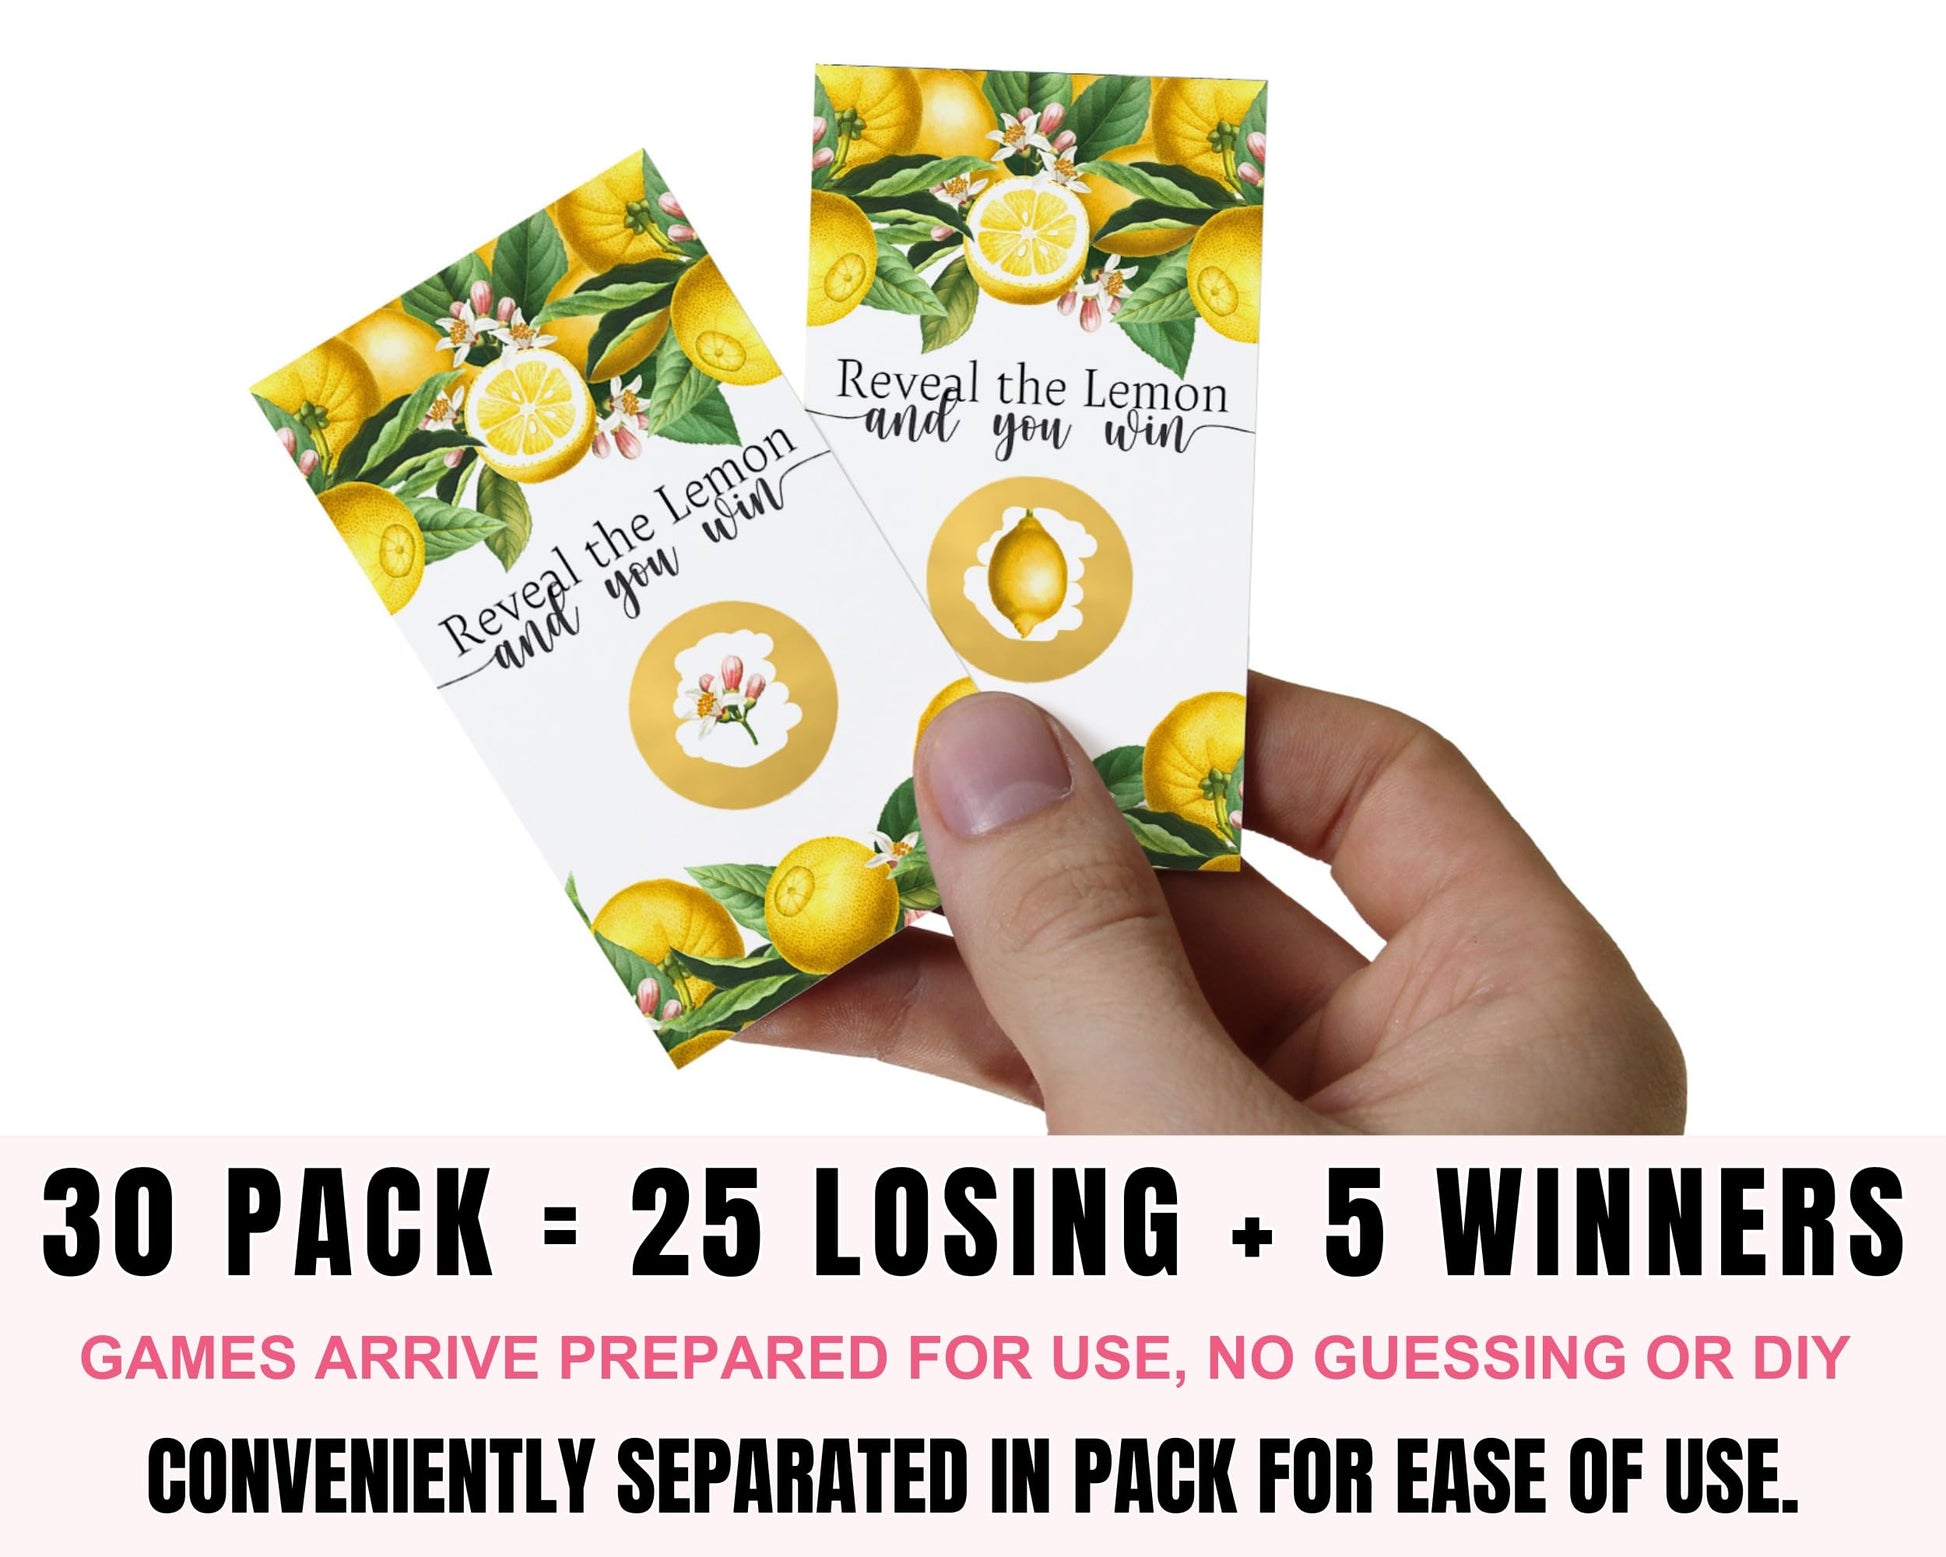 Showers, Wedding, Graduation, Lottery Ticket Scratchers, Prize Drawings, Lemon Favors, Greenery Ideas, 30 Card PackPaper Clever Party